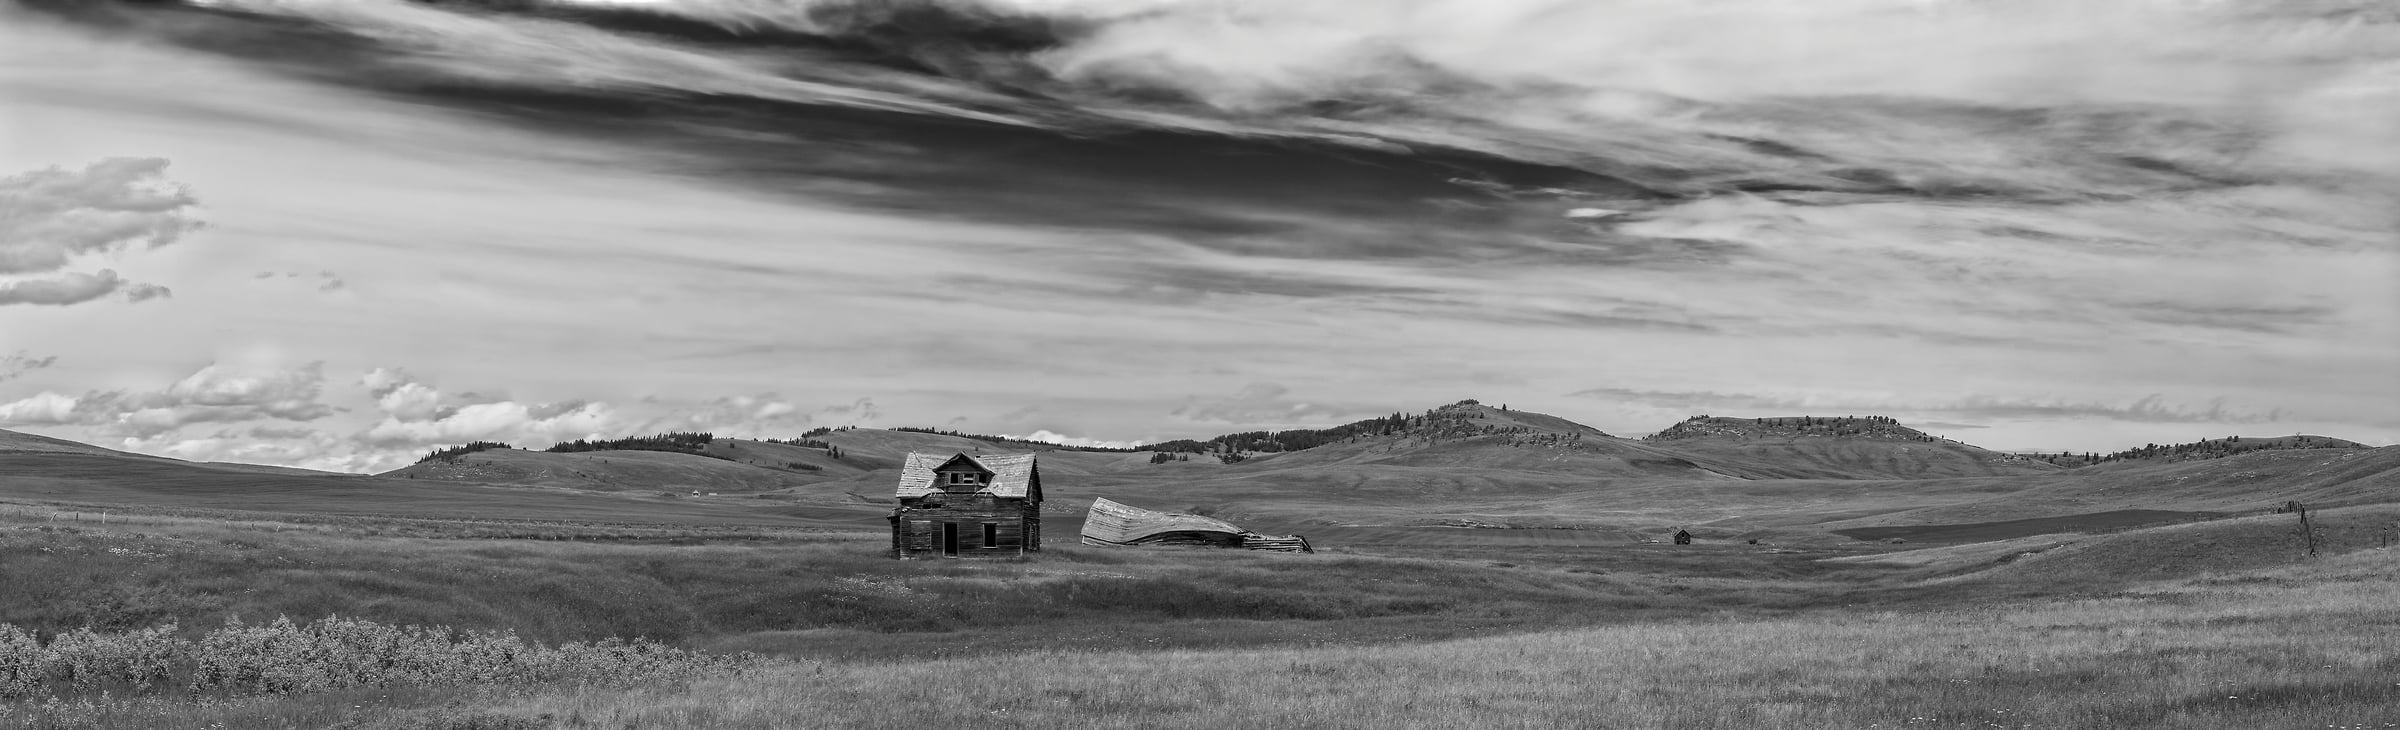 232 megapixels! A very high resolution, large-format VAST photo print of a homestead; black & white landscape photograph created by Scott Dimond in Pincher Creek No. 9, Alberta, Canada.